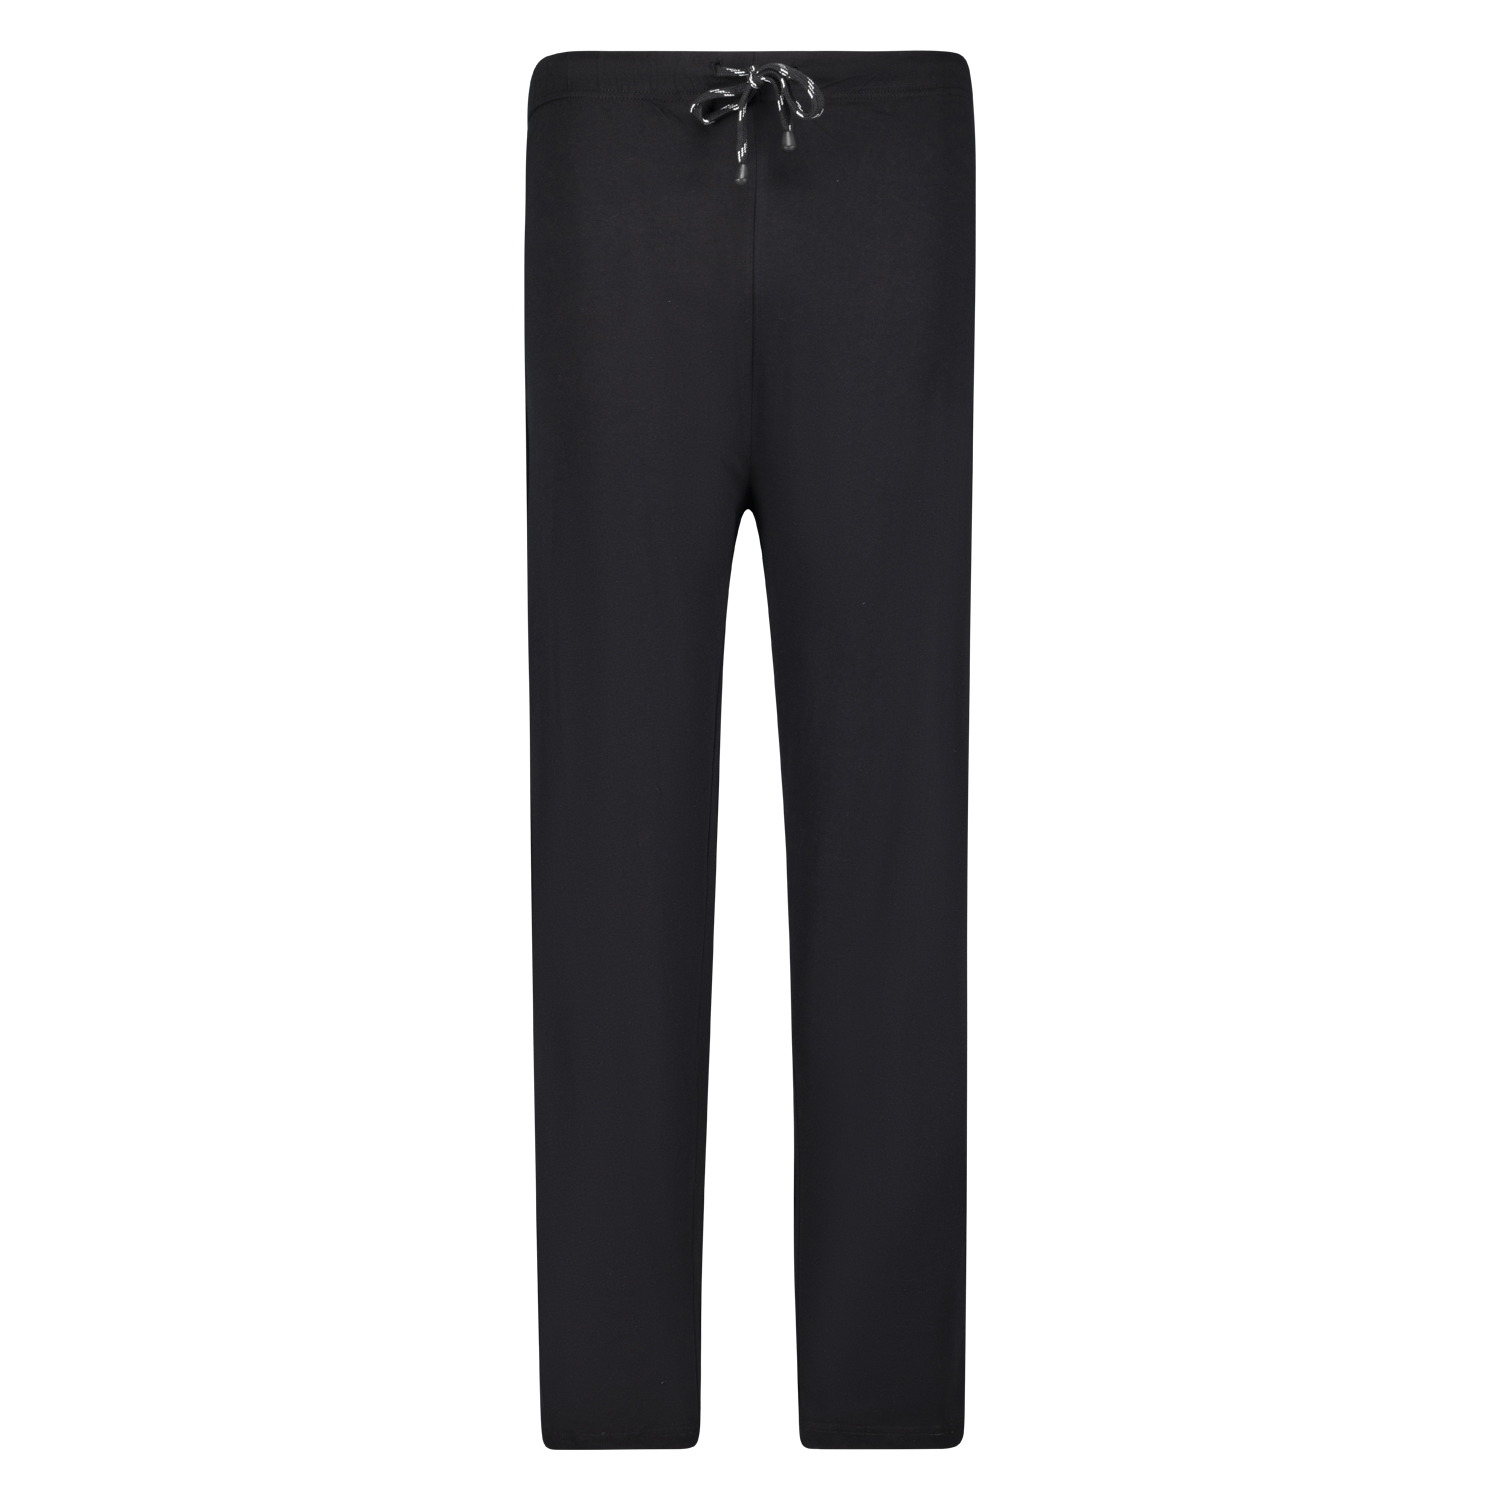 Long pyjama pants in black by ADAMO in plus sizes up to 10XL and 122